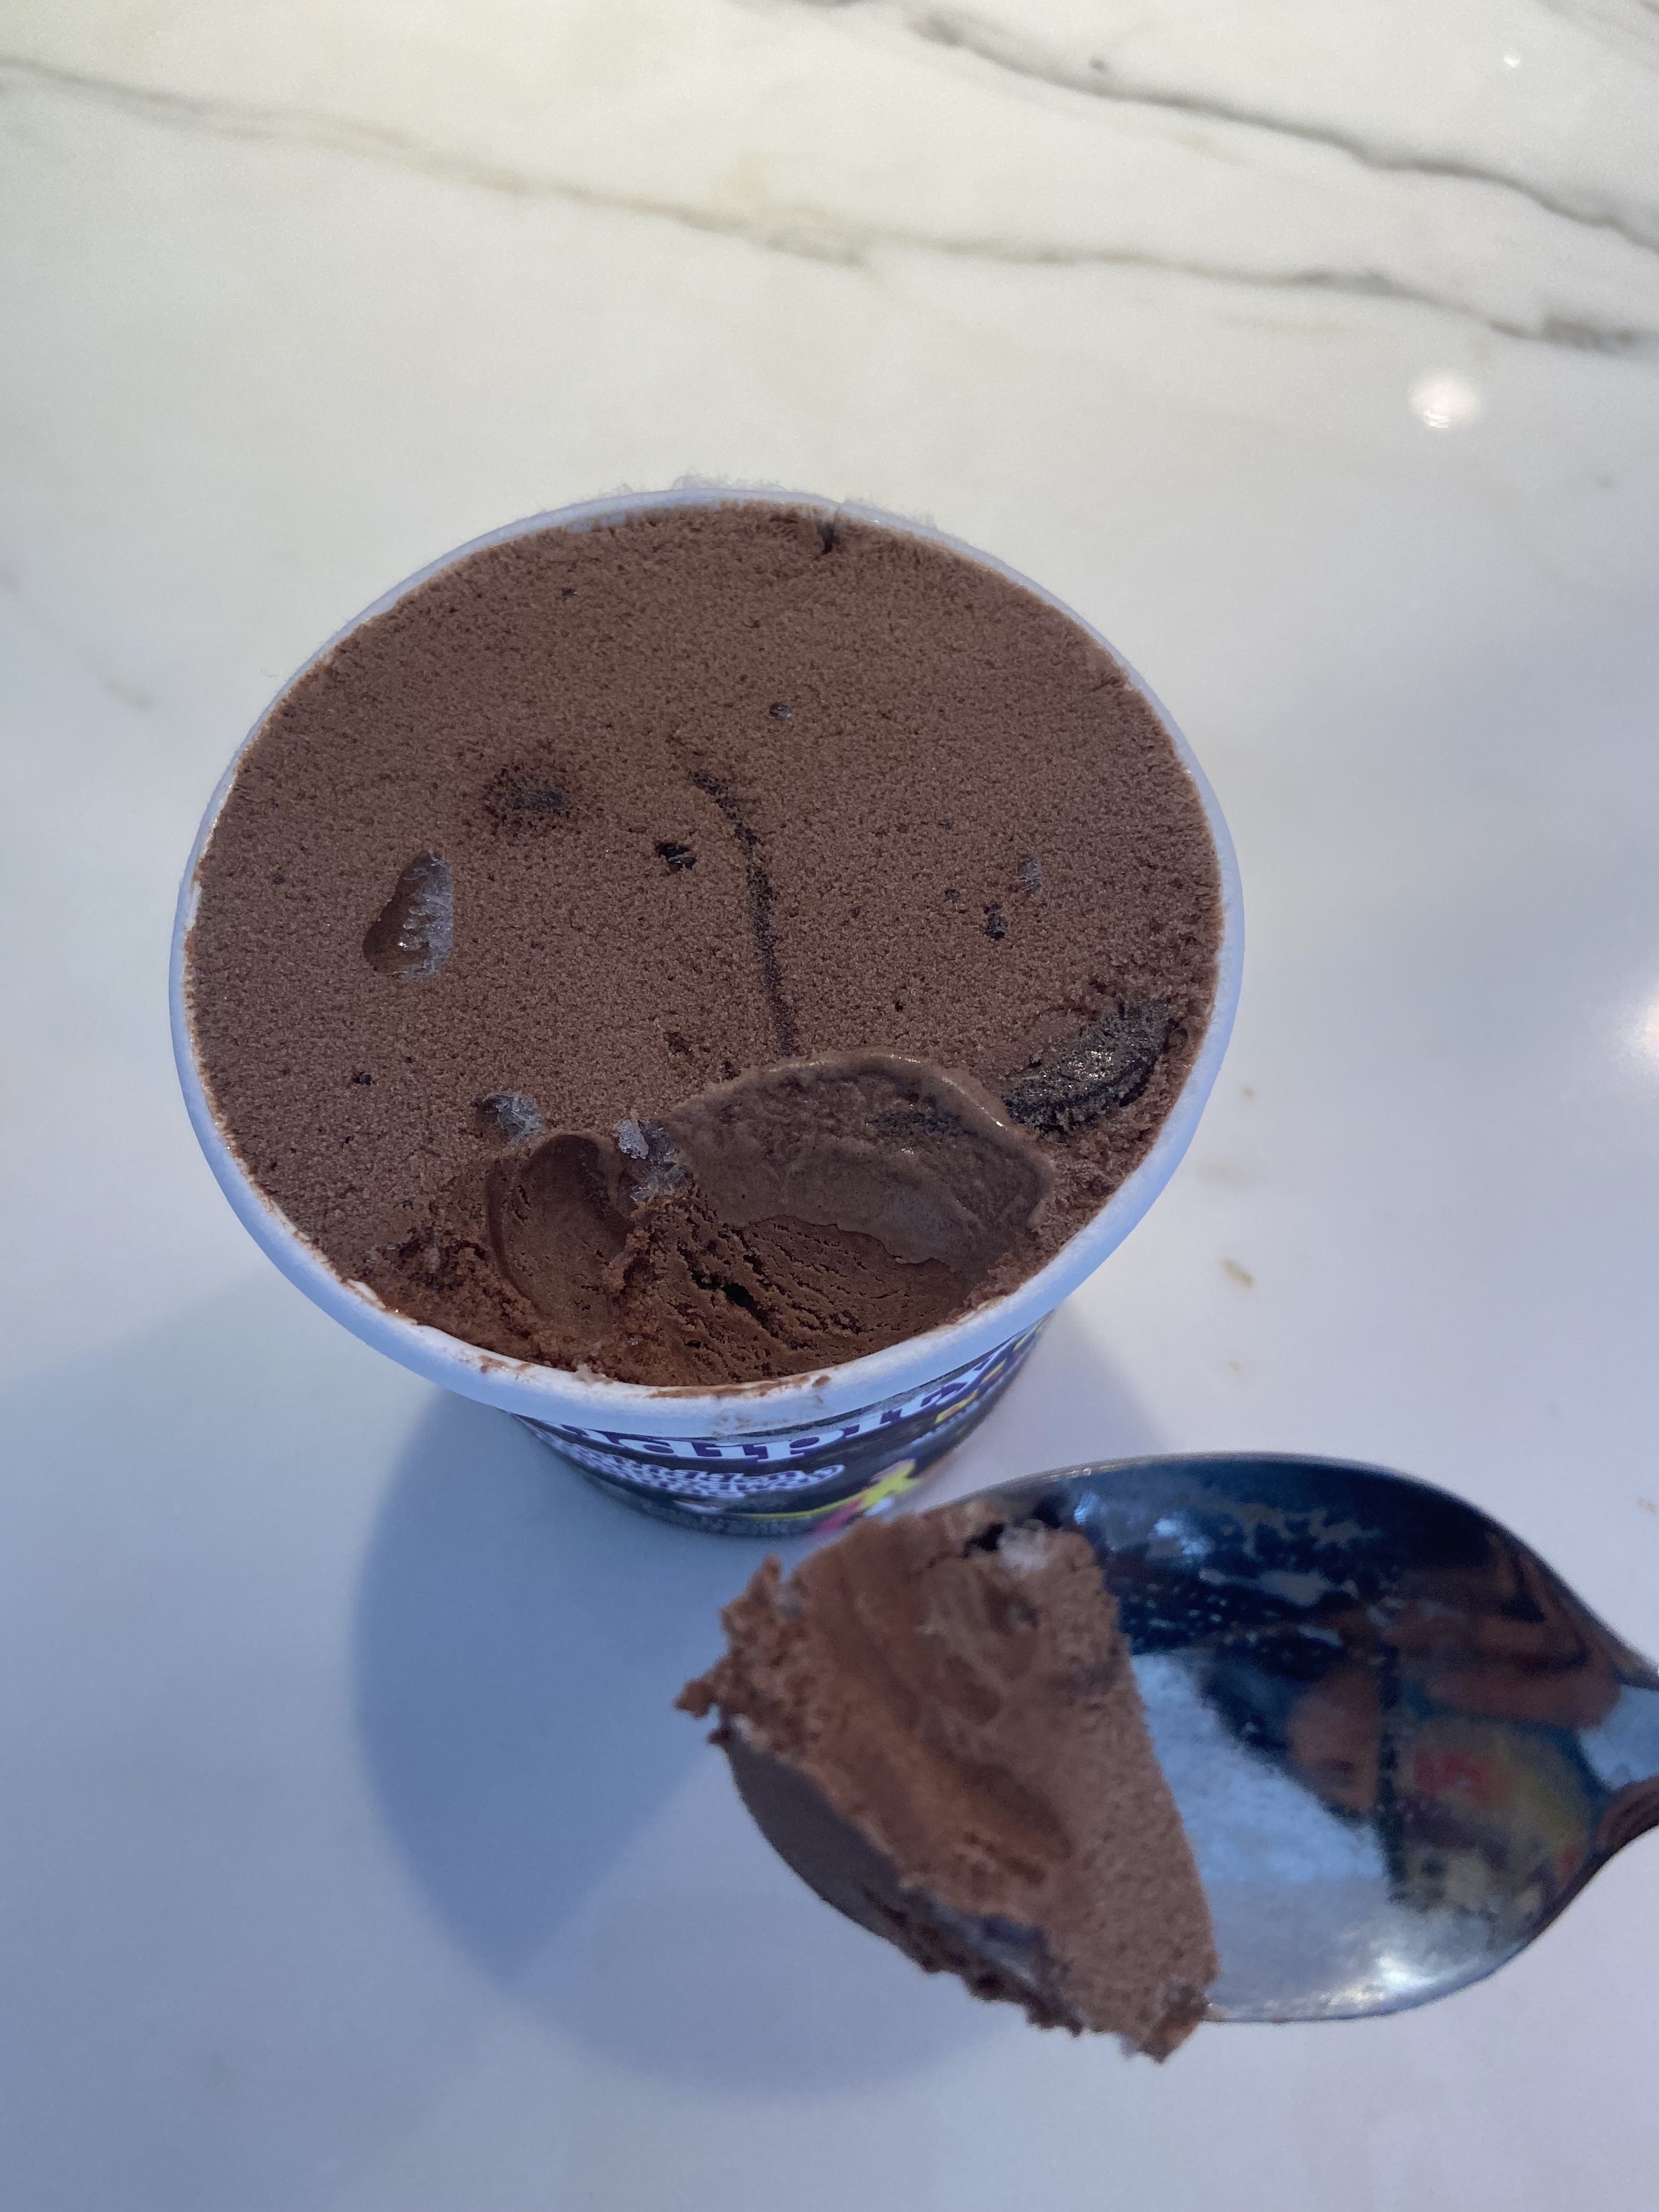 The ice cream opened and with one spoonful taken out; it is the color of chocolate, with a few visible chunks of brownie and one visible fudge swirl